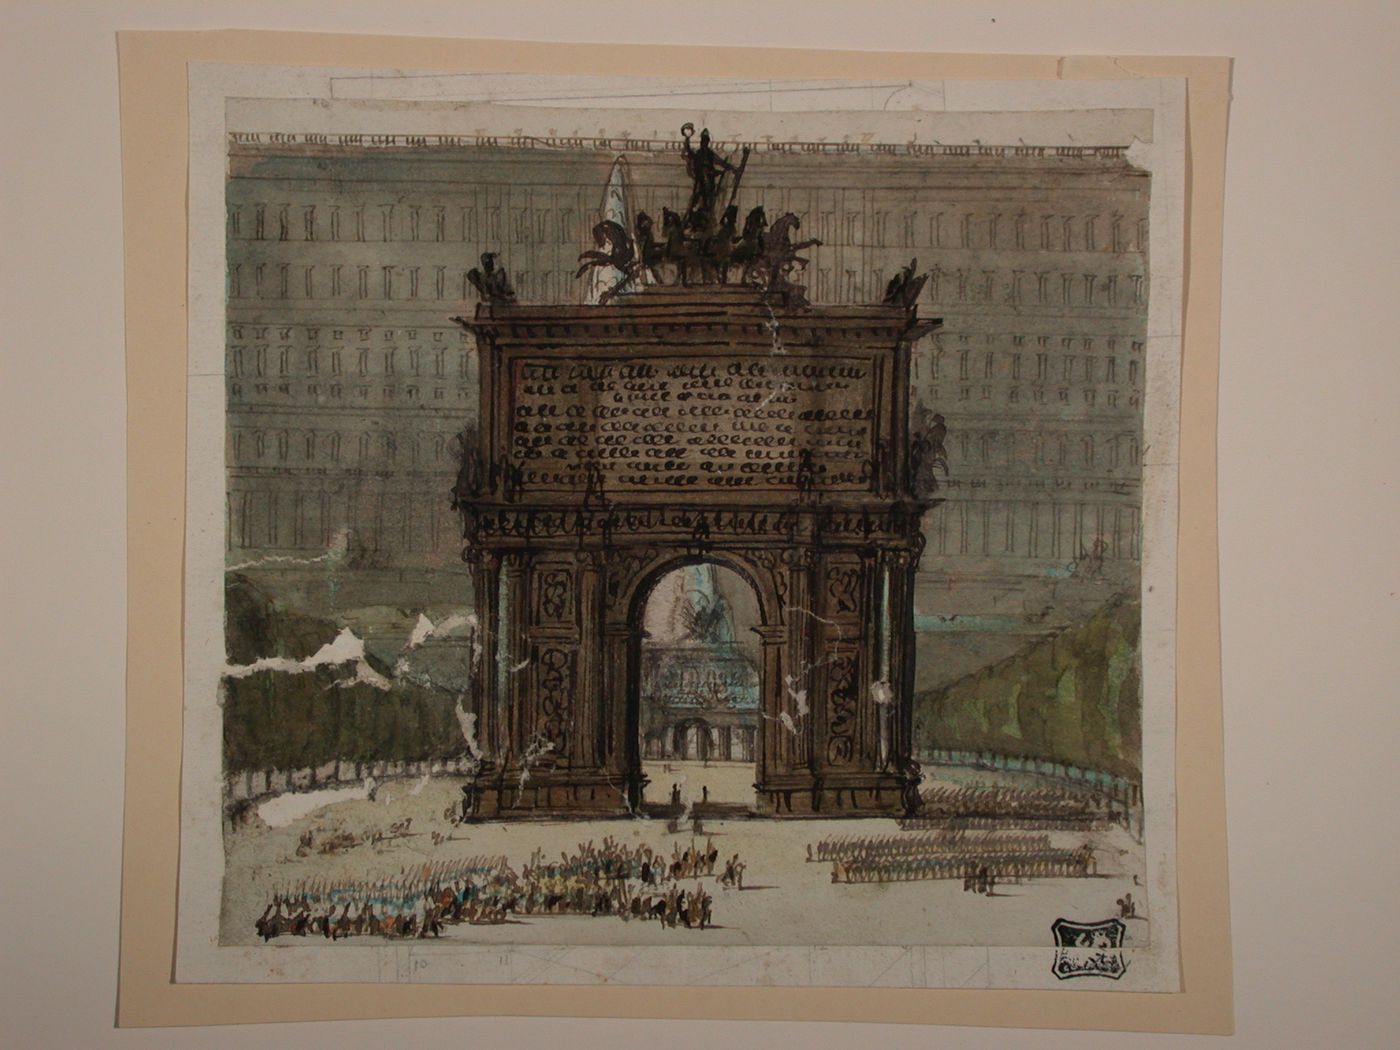 Visionary design for a triumphal arch in a square, with a fountain and a multi-story facade behind